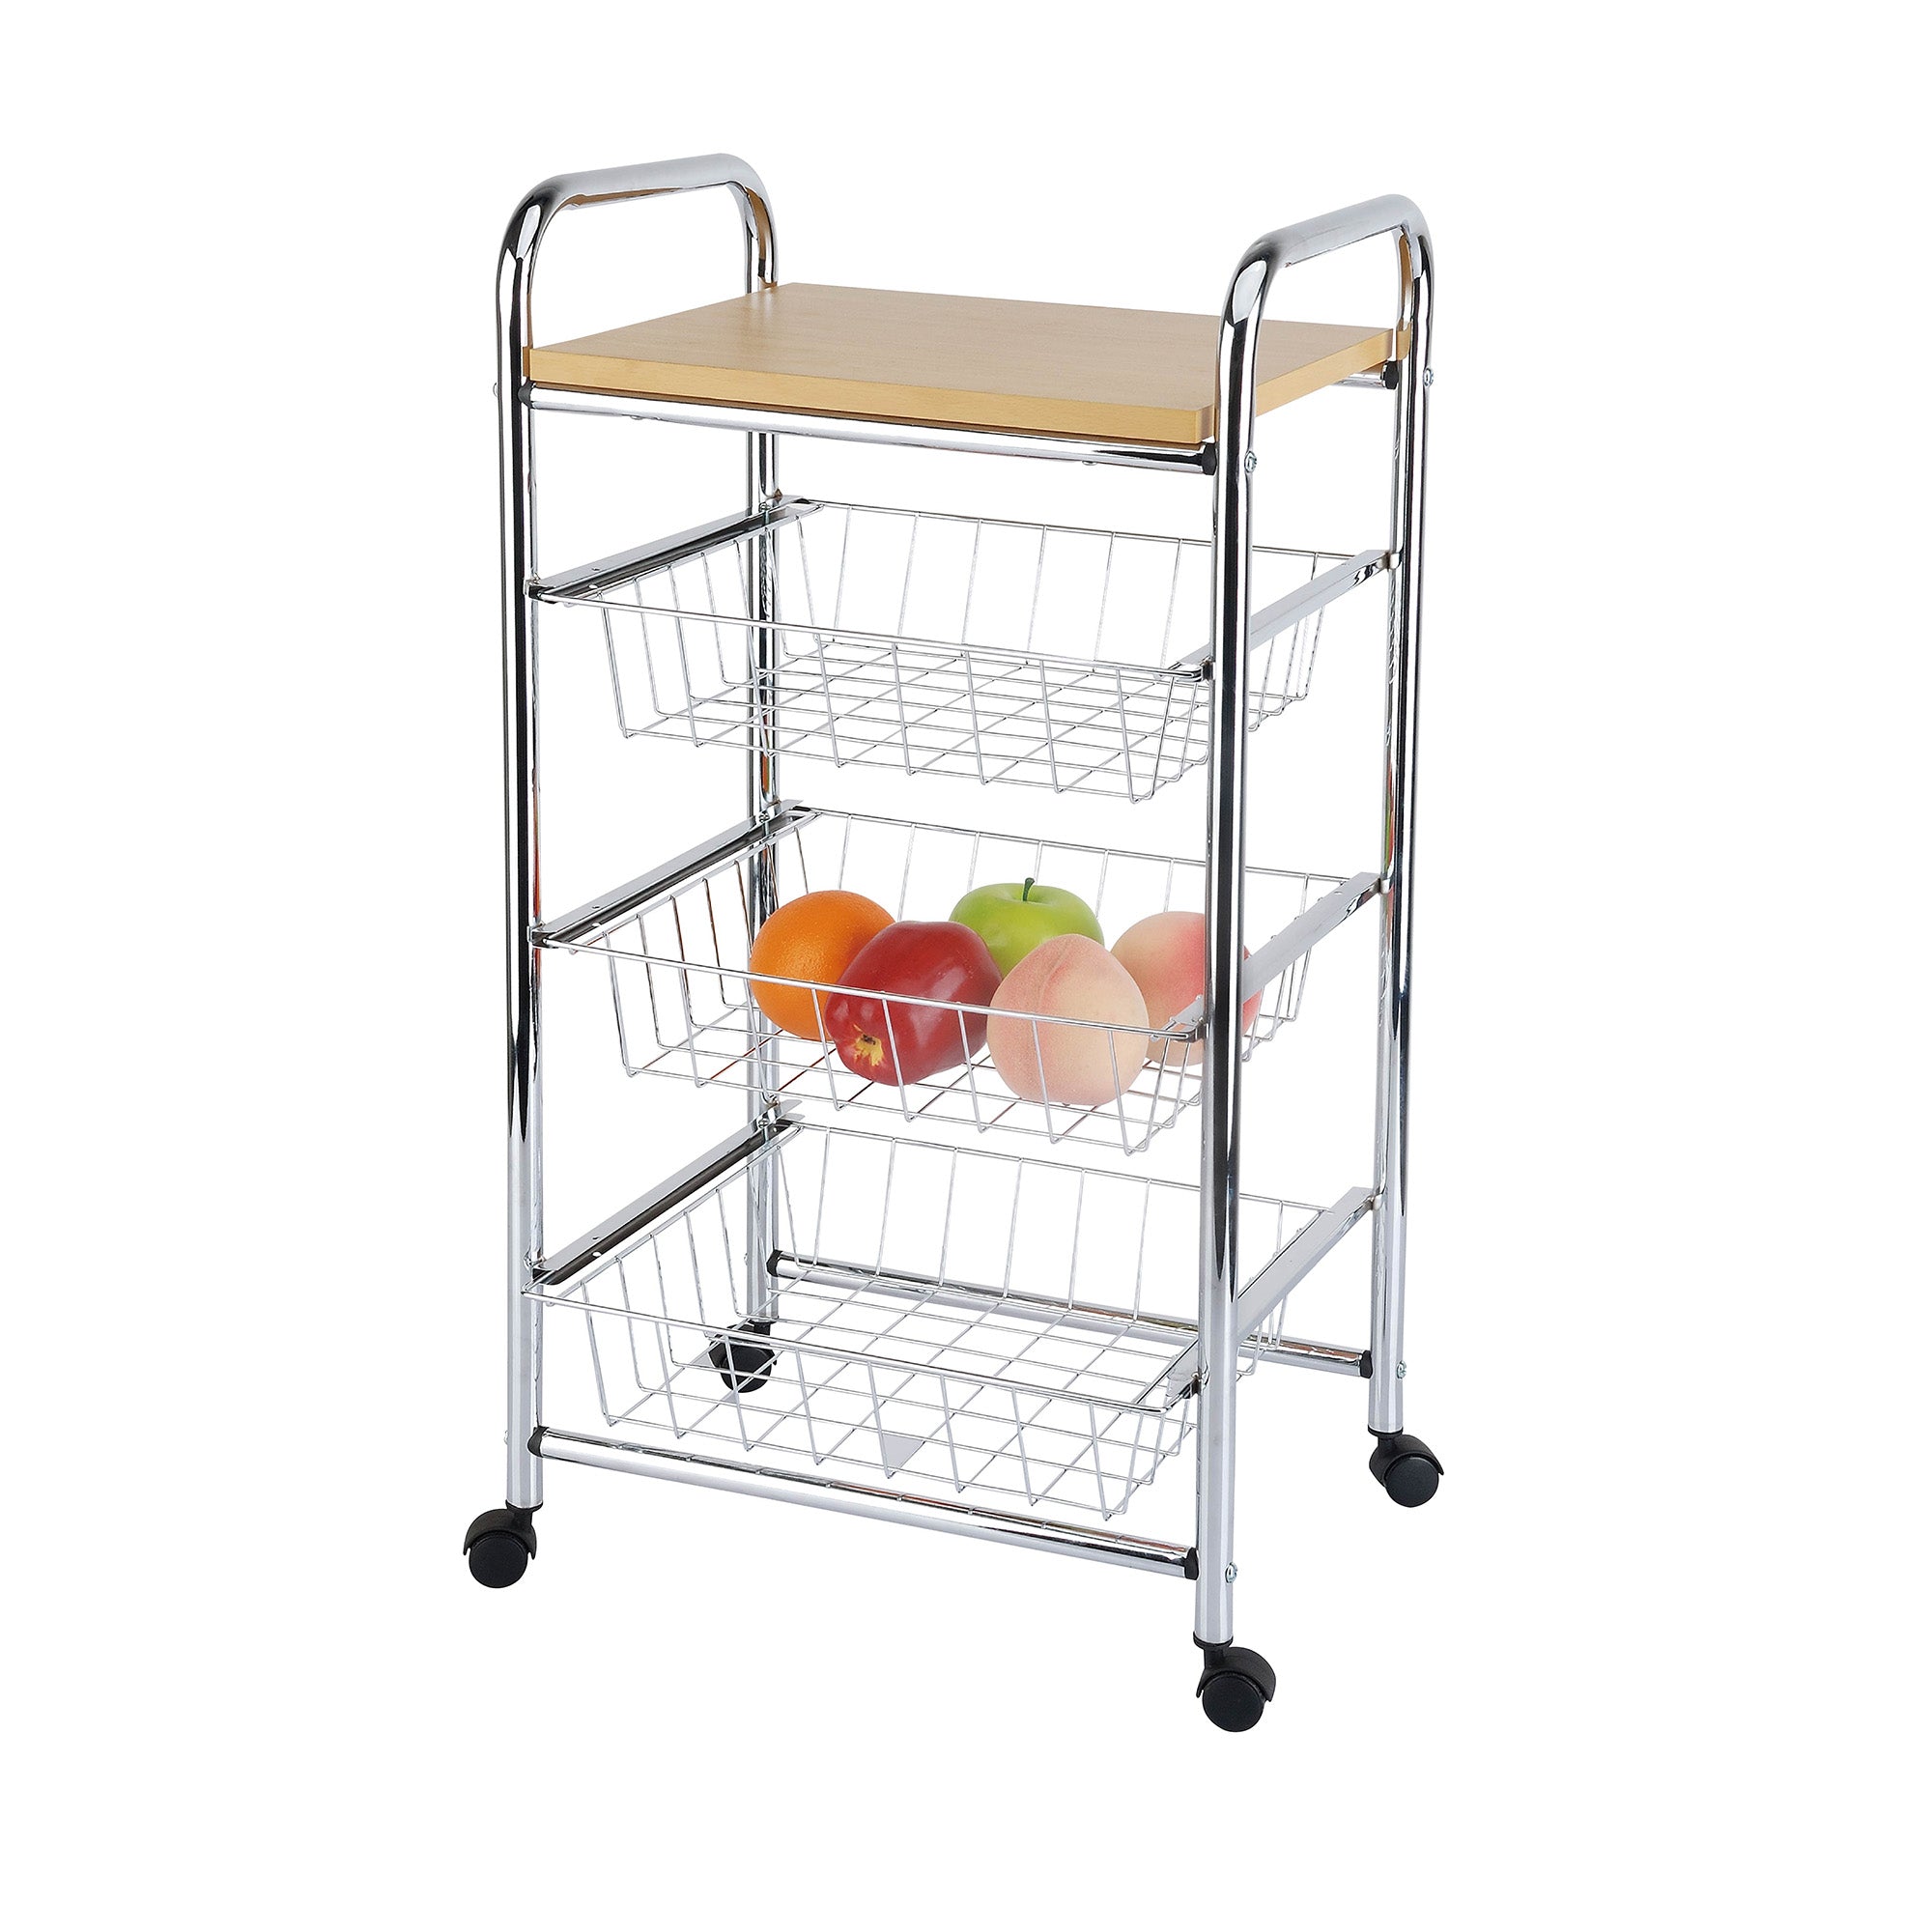 4-Tier Storage Rack with wheels, AN-40-072